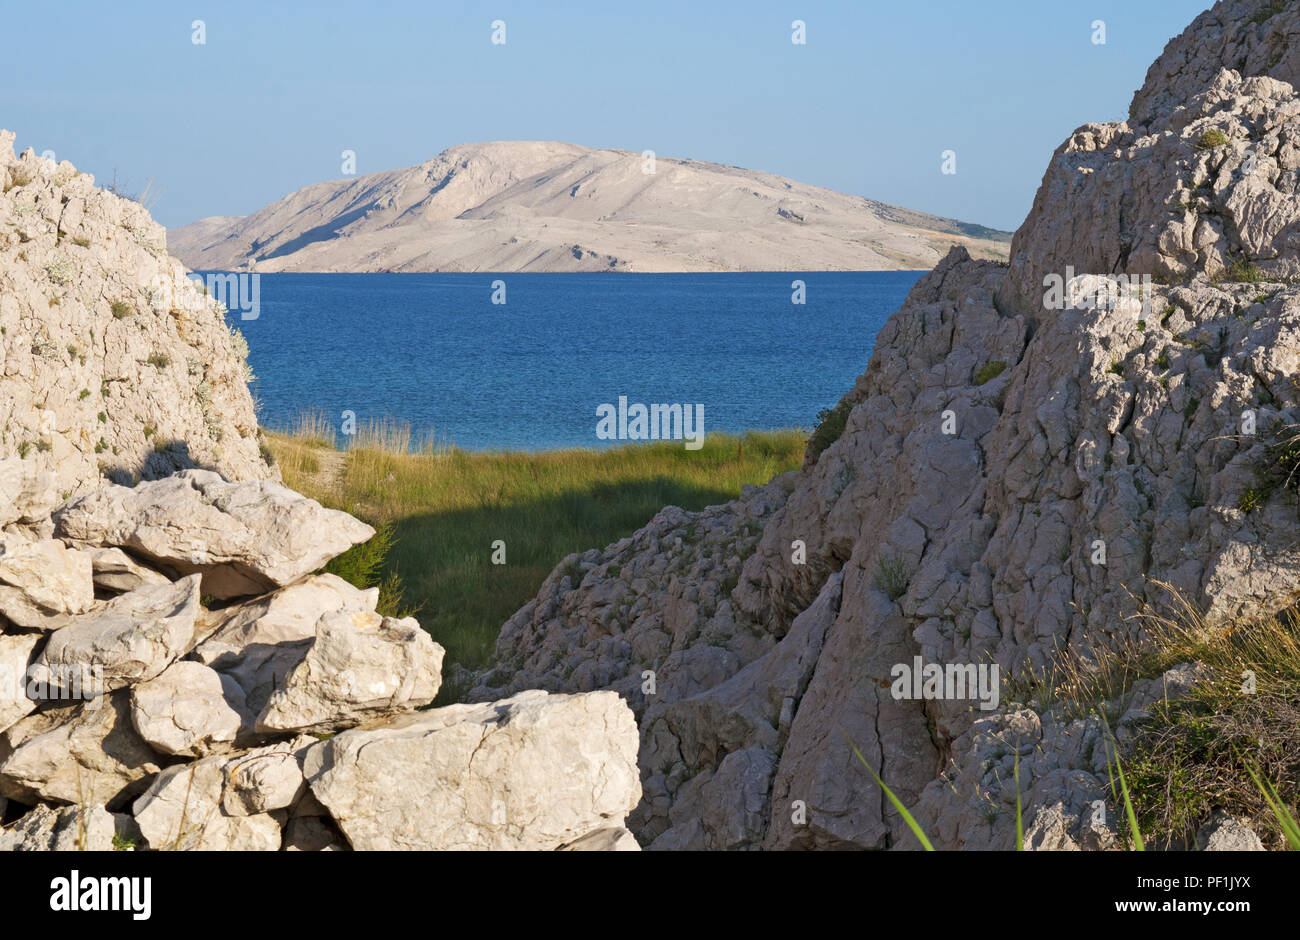 Croatia, Europe: a glimpse of Rucica, the pebbled beach nestled in a barren bay with little green plants and desert landscape on the famous Pag island Stock Photo